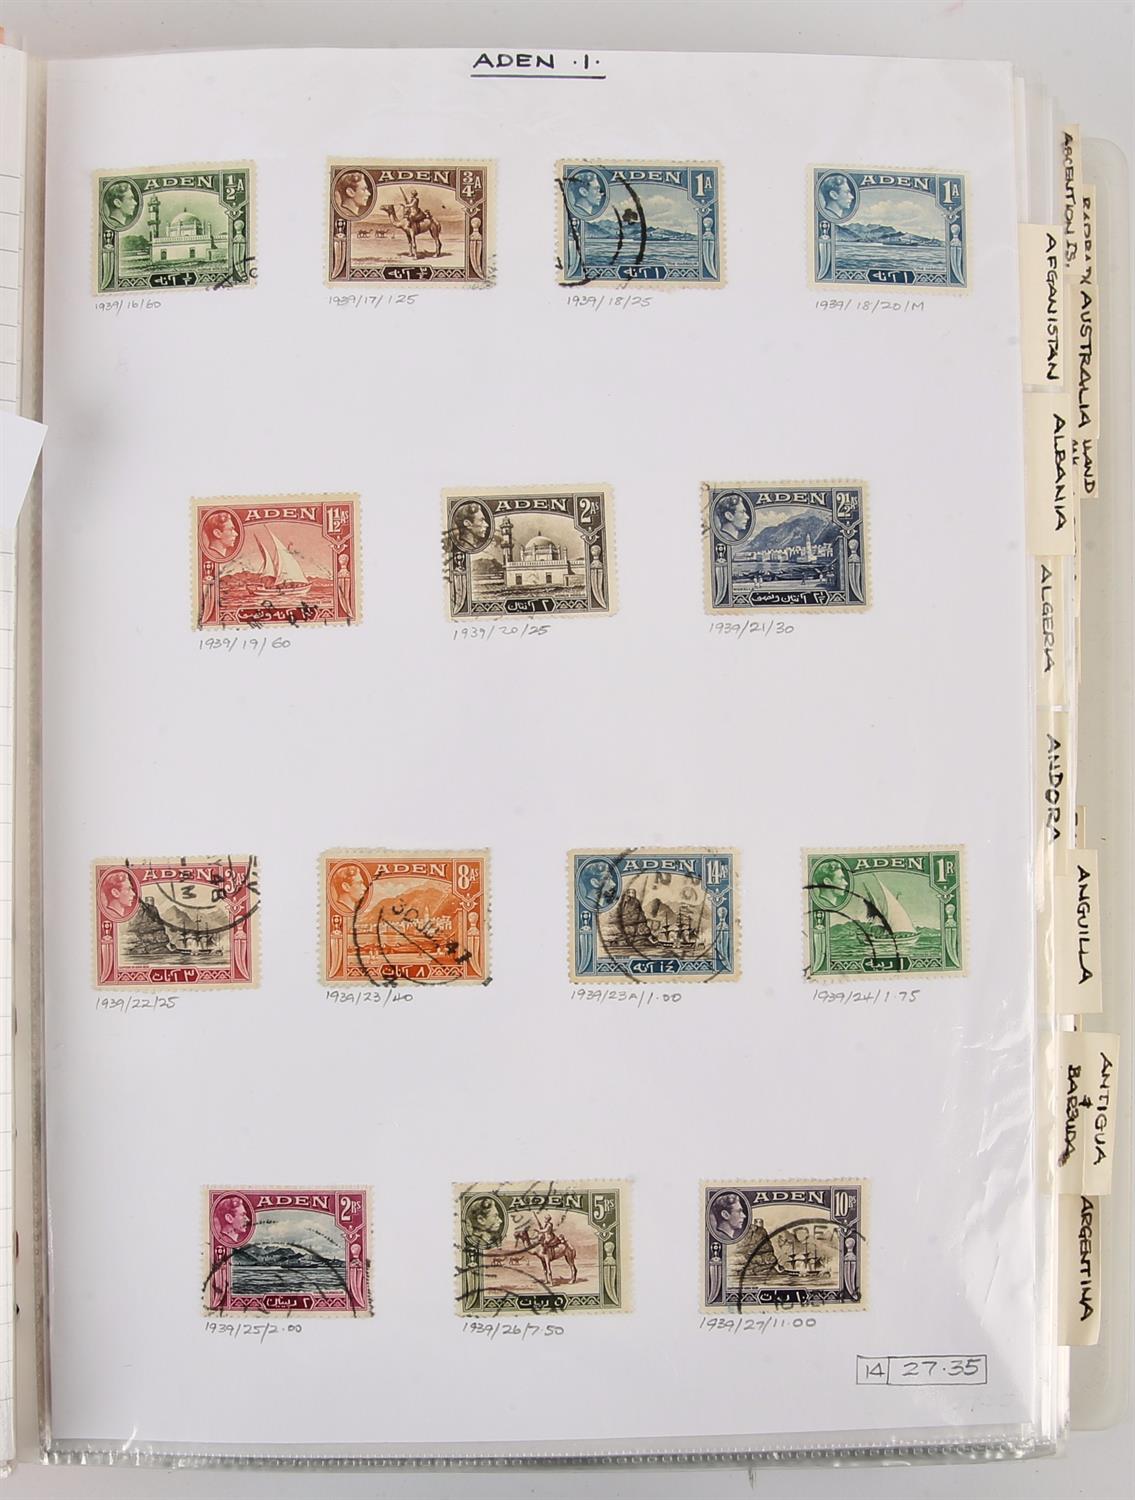 Albums(14) with orange spine, World Stamps, Mint and Used, with Bechuanaland, Canada, China, Cyprus, - Image 7 of 7